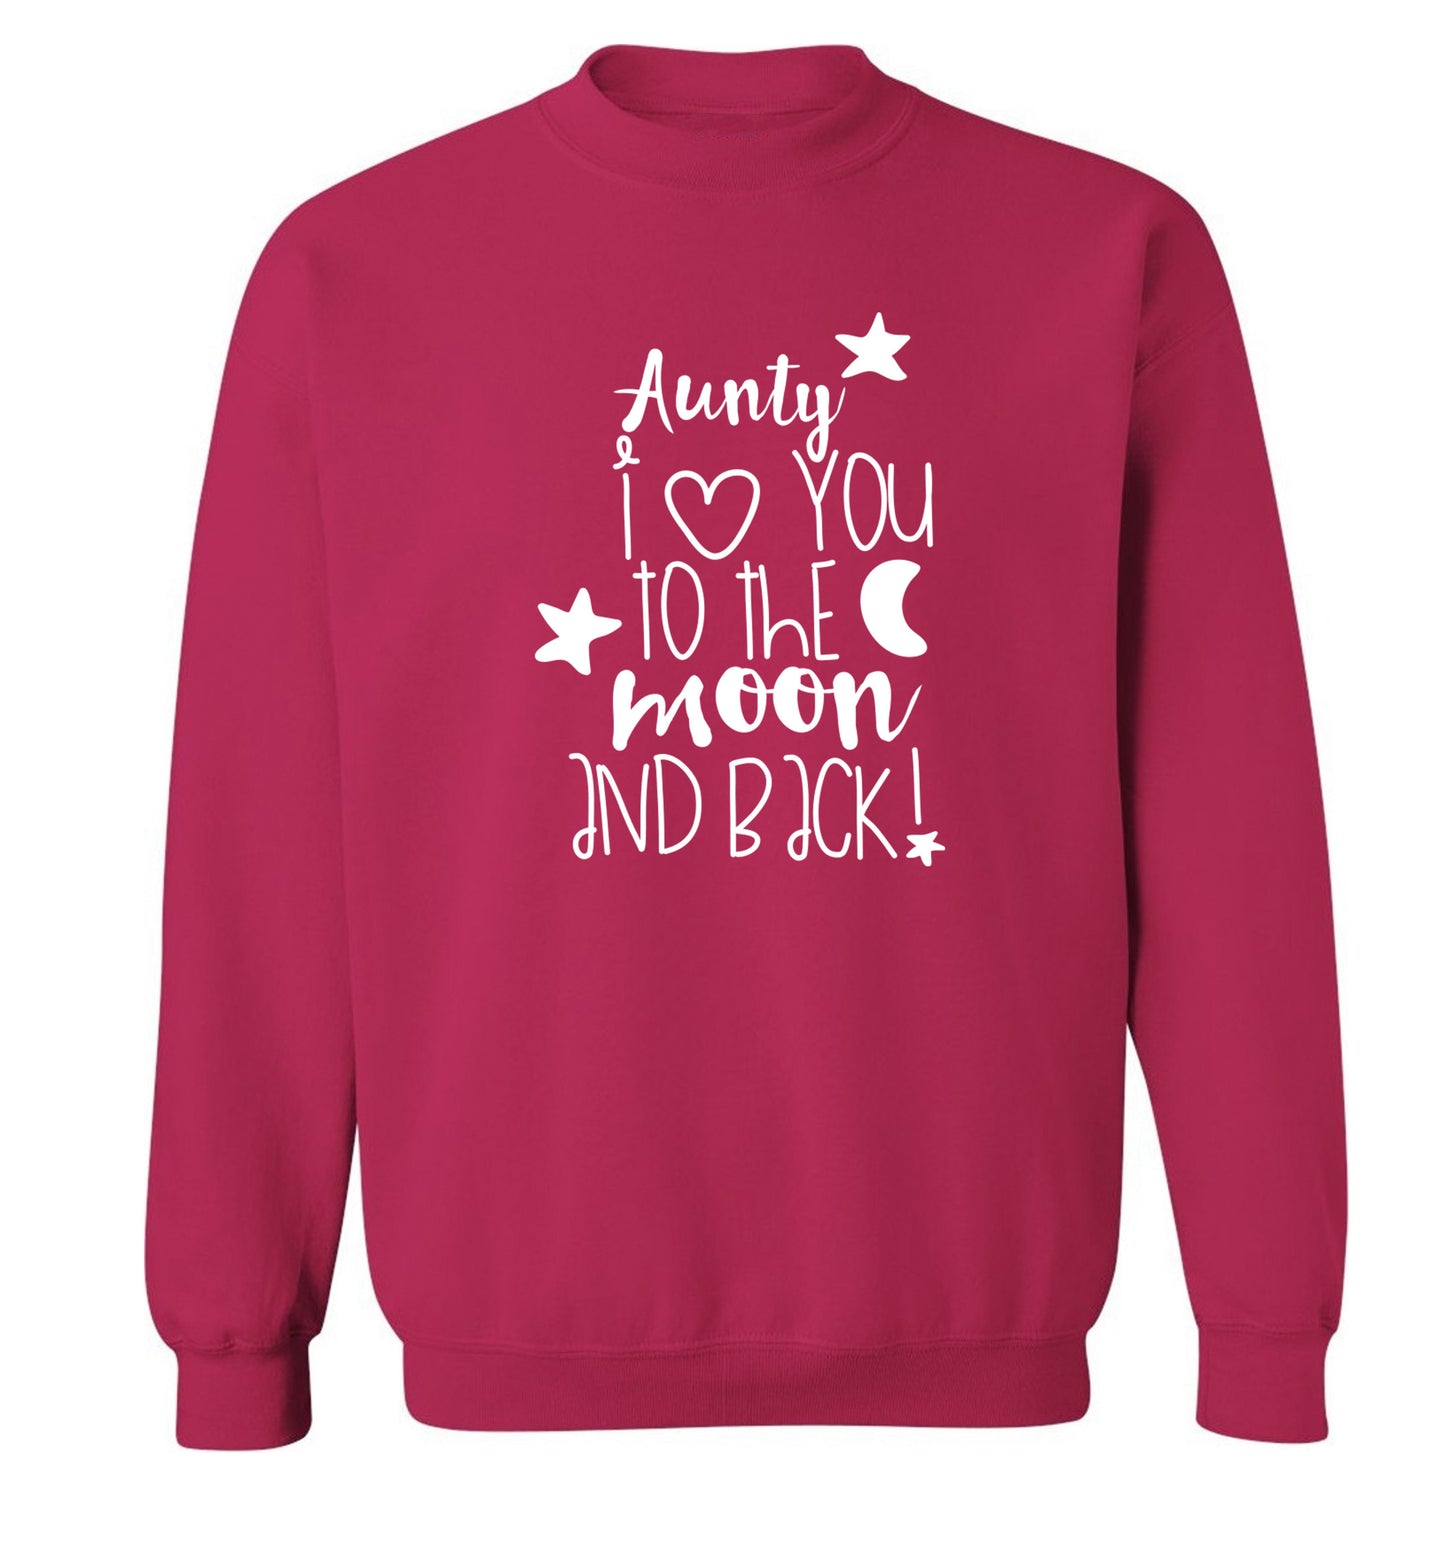 Aunty I love you to the moon and back Adult's unisex pink  sweater XL